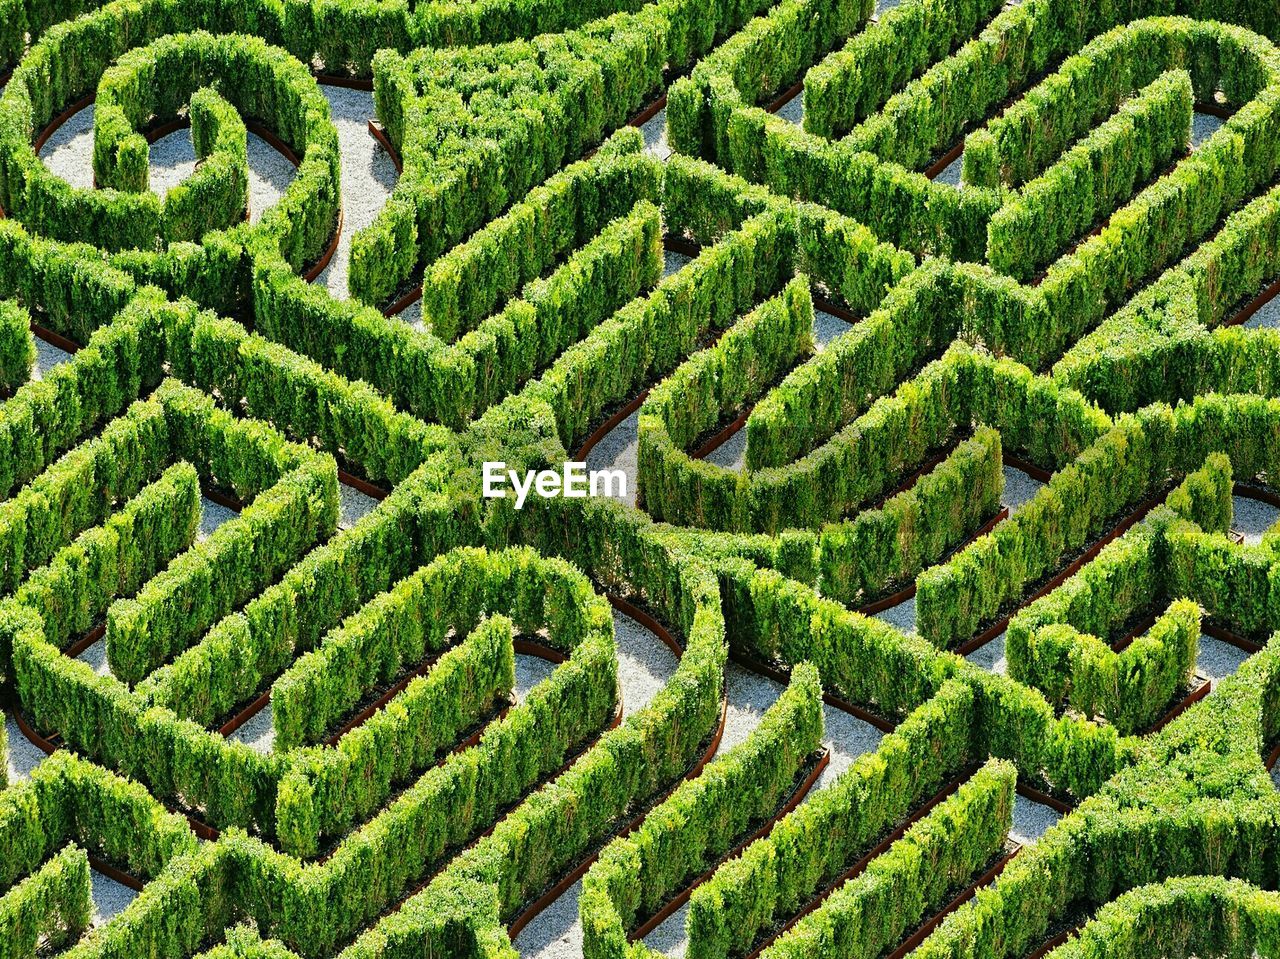 High angle view of plant maze